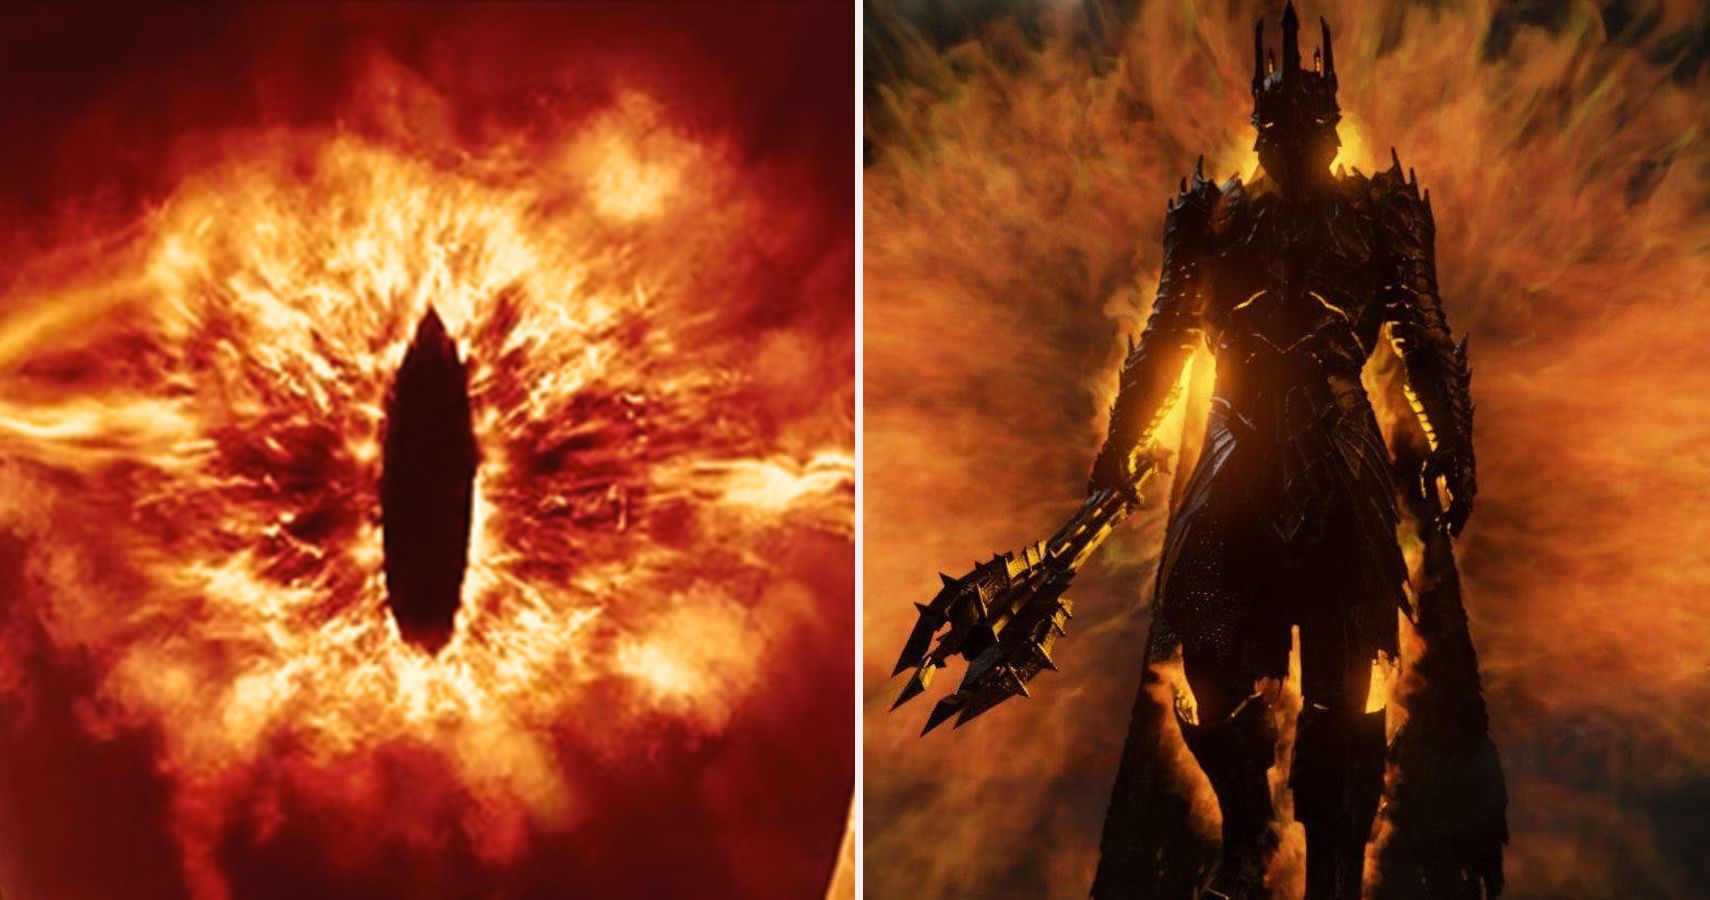 The Lord Of The Rings 10 Facts About Sauron They Leave Out Of The